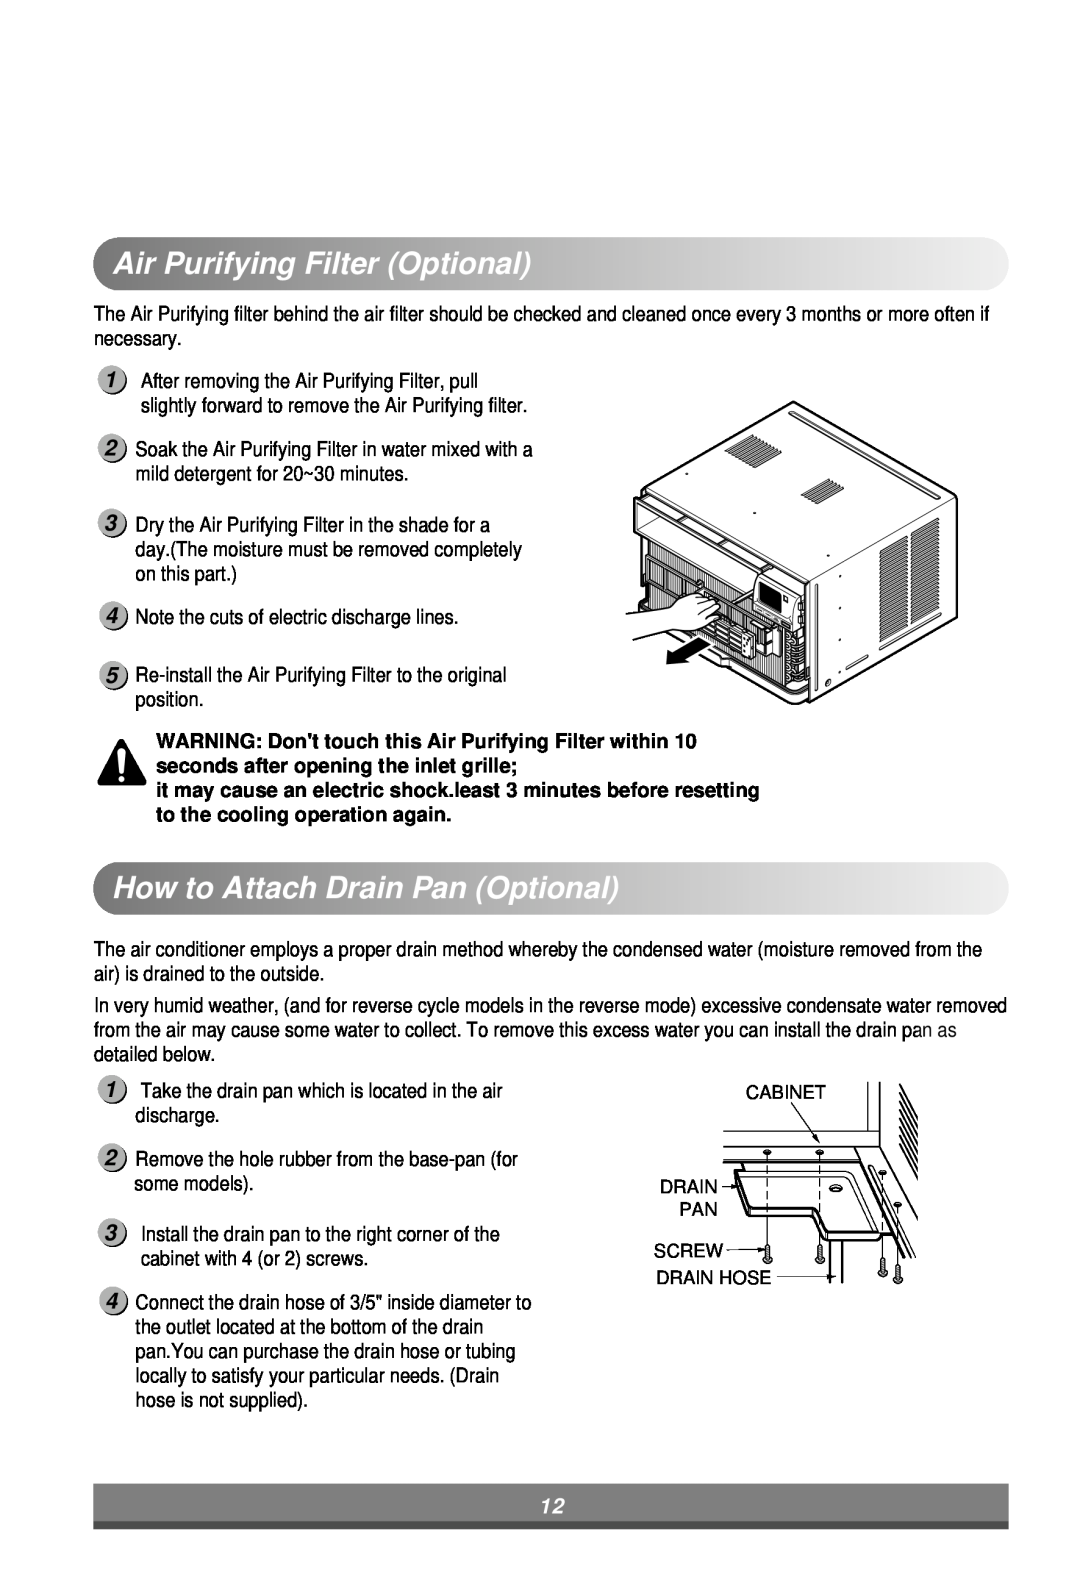 LG Electronics LW7000ER owner manual Cabinet Drain Pan, Screw, Drain Hose, Note the cuts of electric discharge lines 